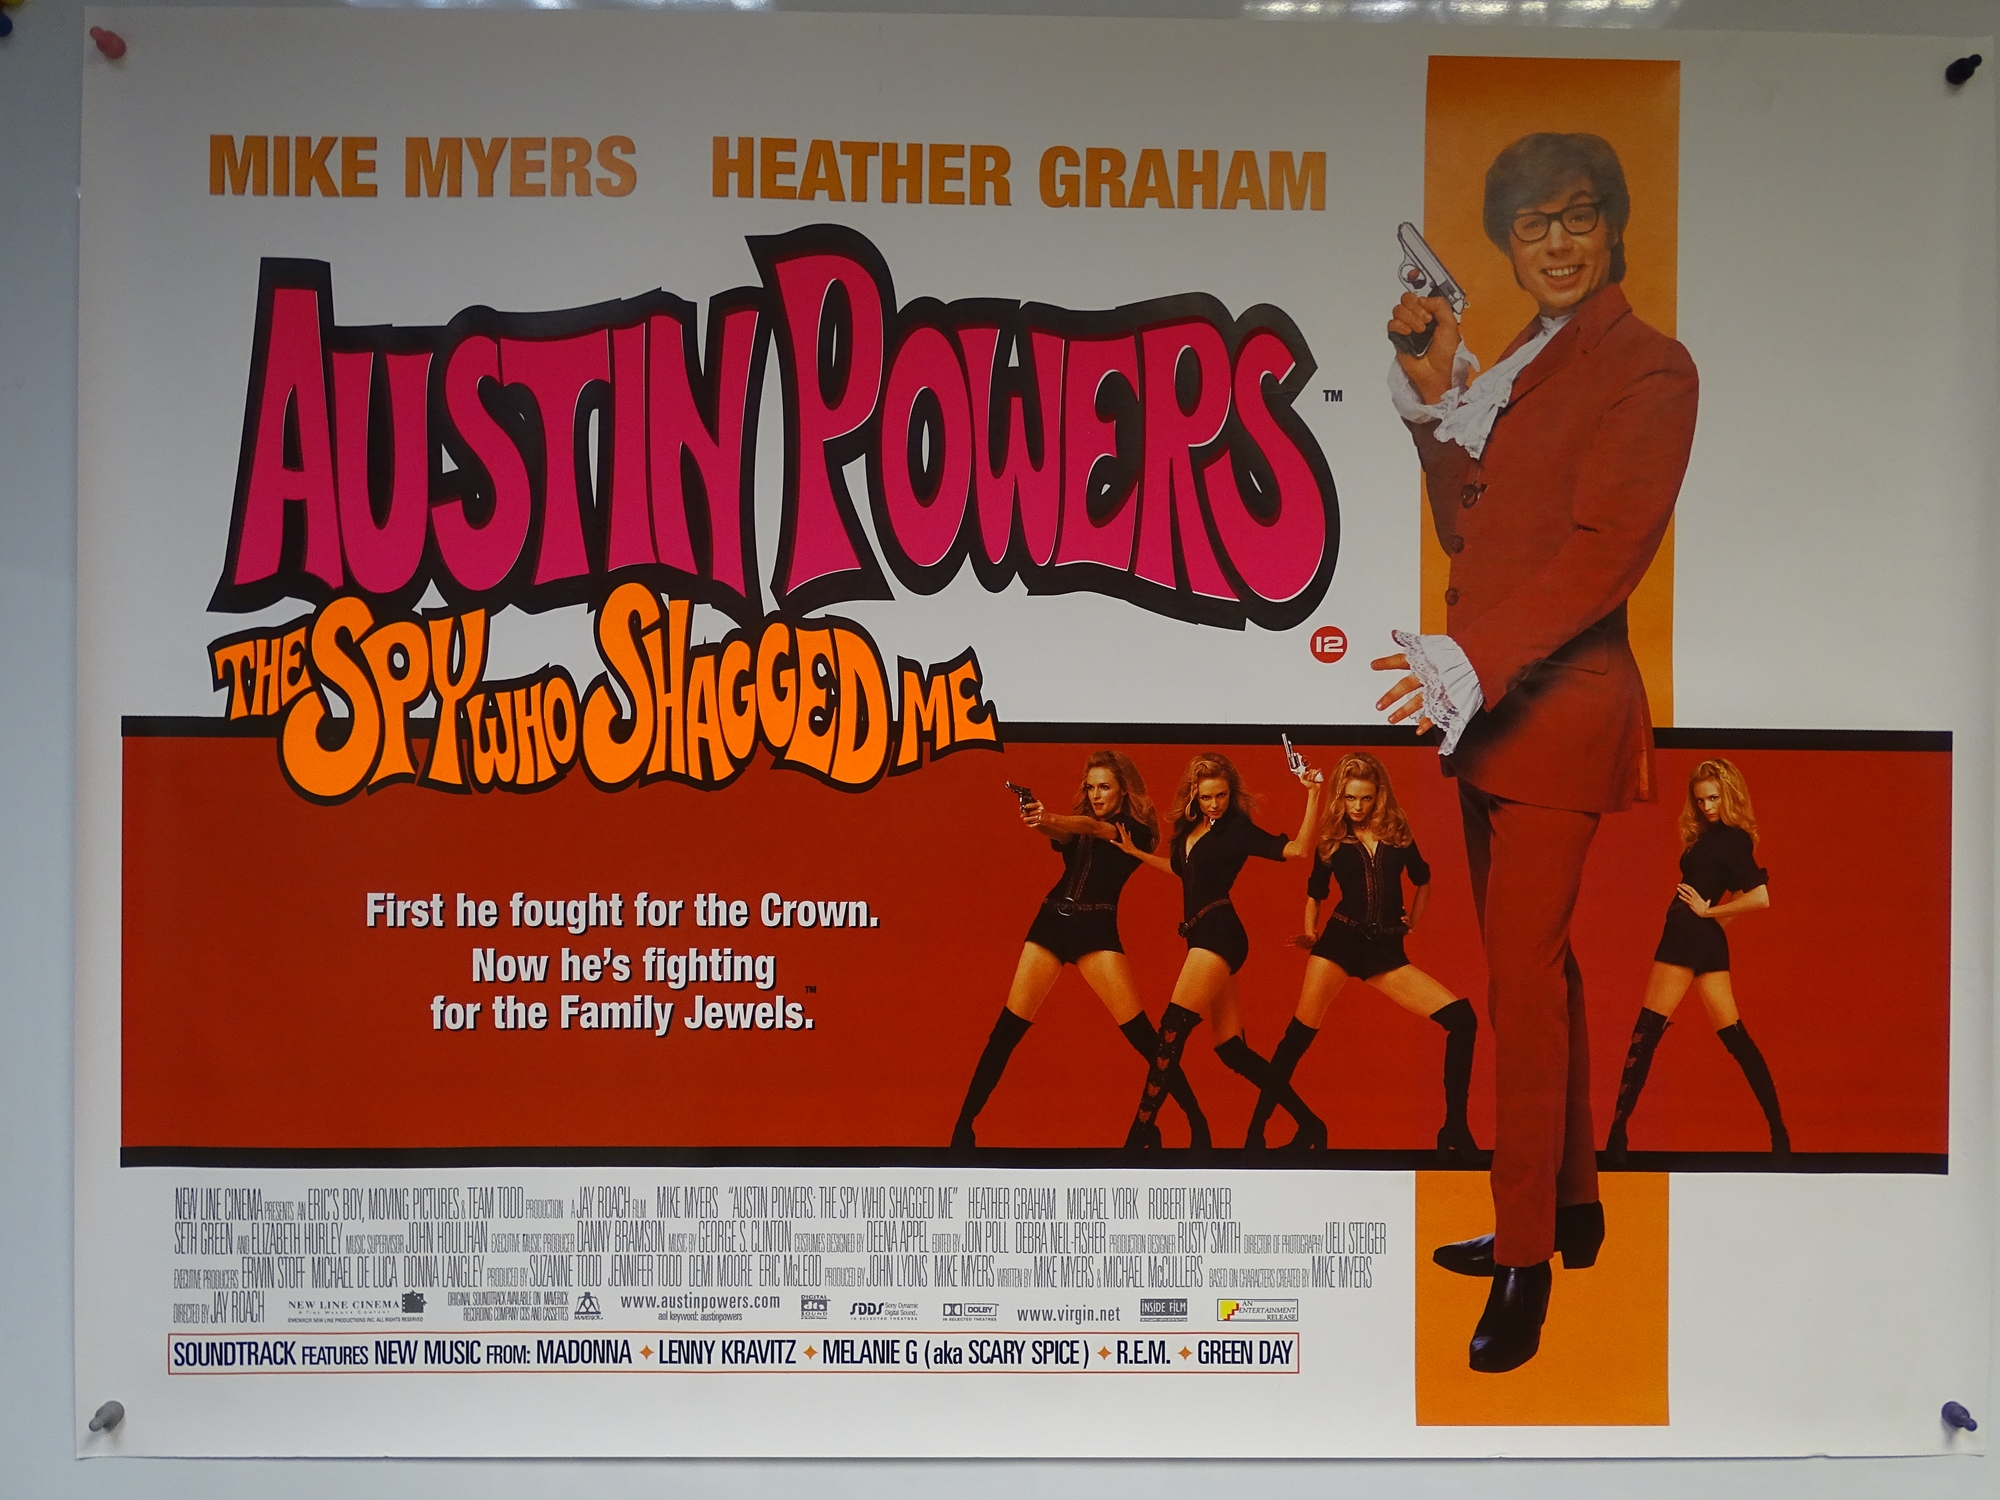 AUSTIN POWERS 'THE SPY WHO SHAGGED ME' (1999) - ACTION / COMEDY - MIKE MYERS / HEATHER GRAHAM - UK